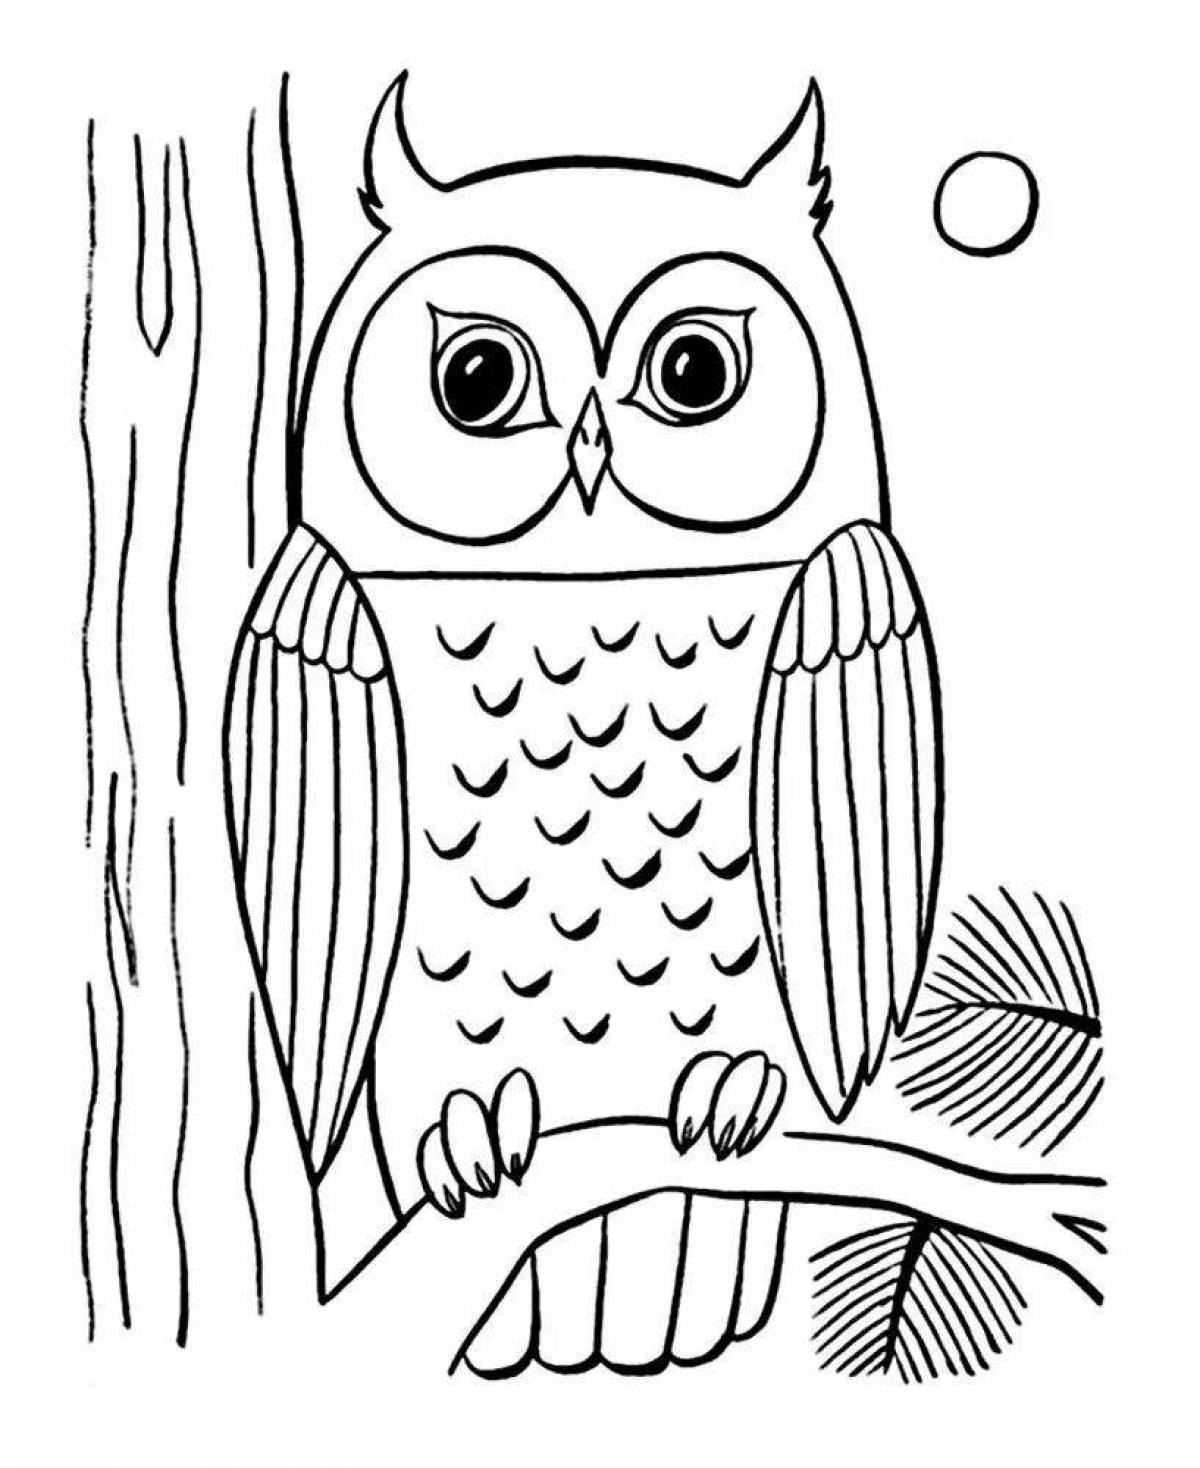 Fancy owl coloring page